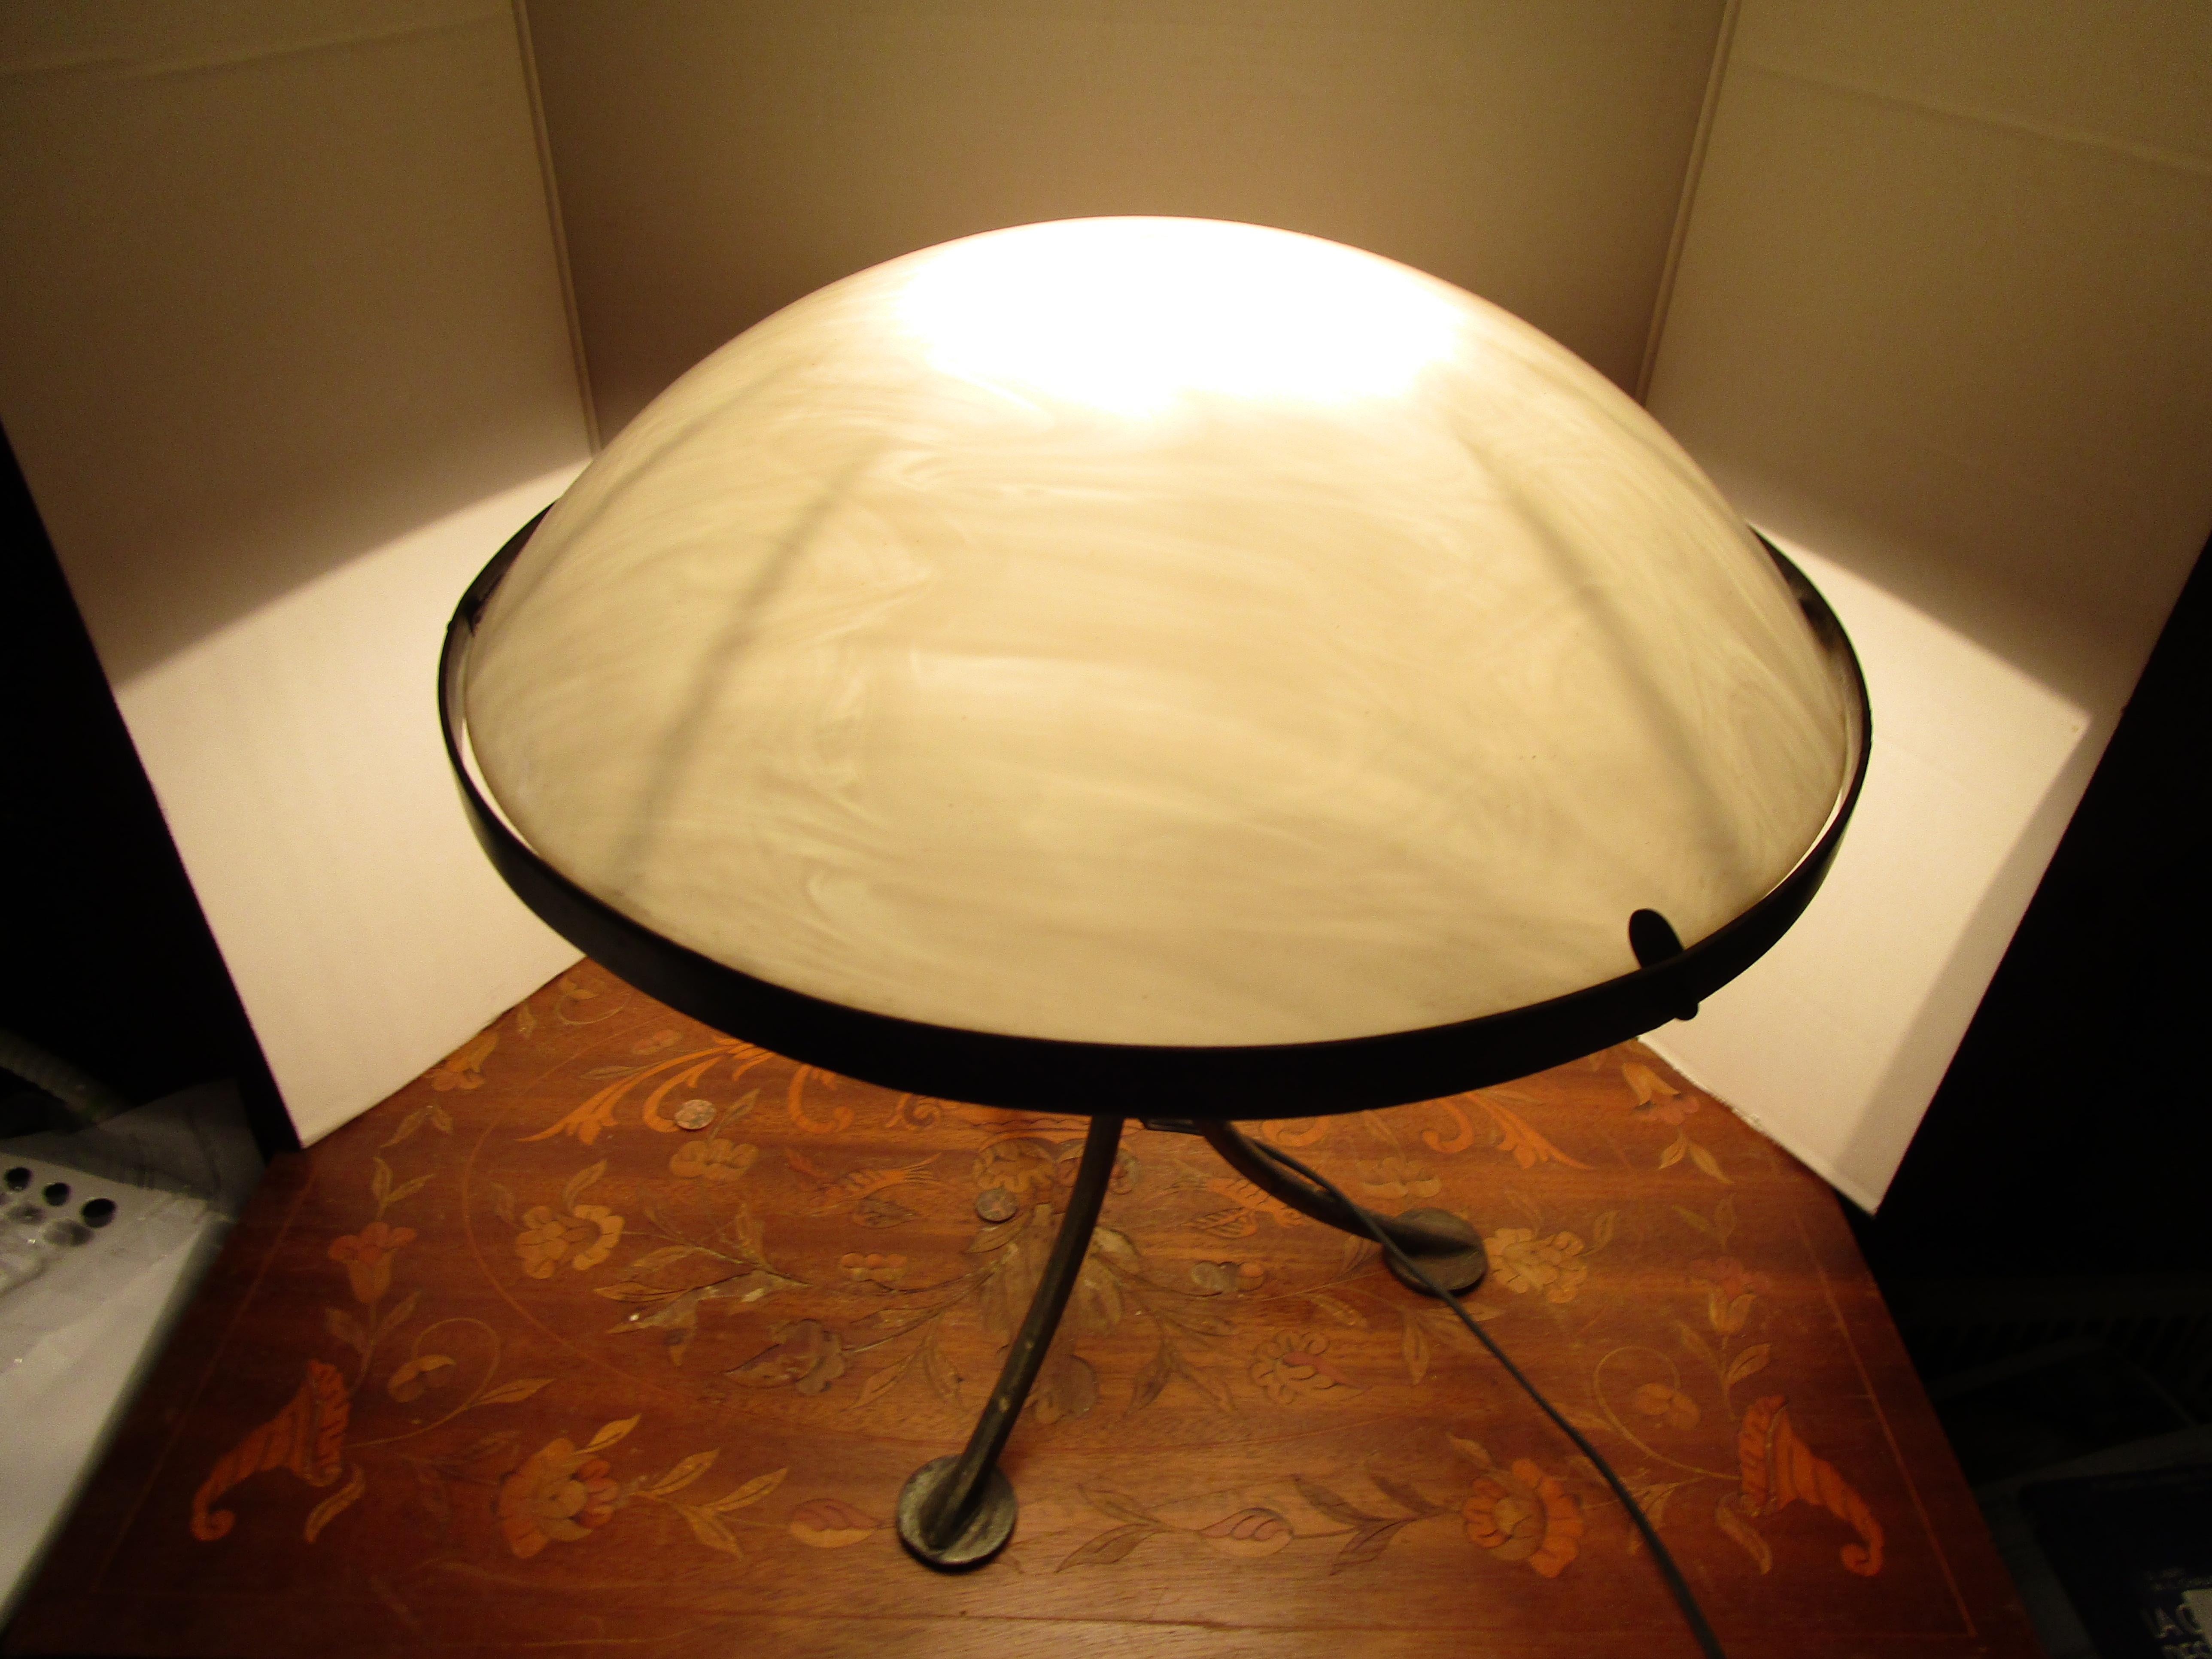 The opaline glass dome gives this lamp the best futuristic feel as well as the tripod feet that suggest some sort of 